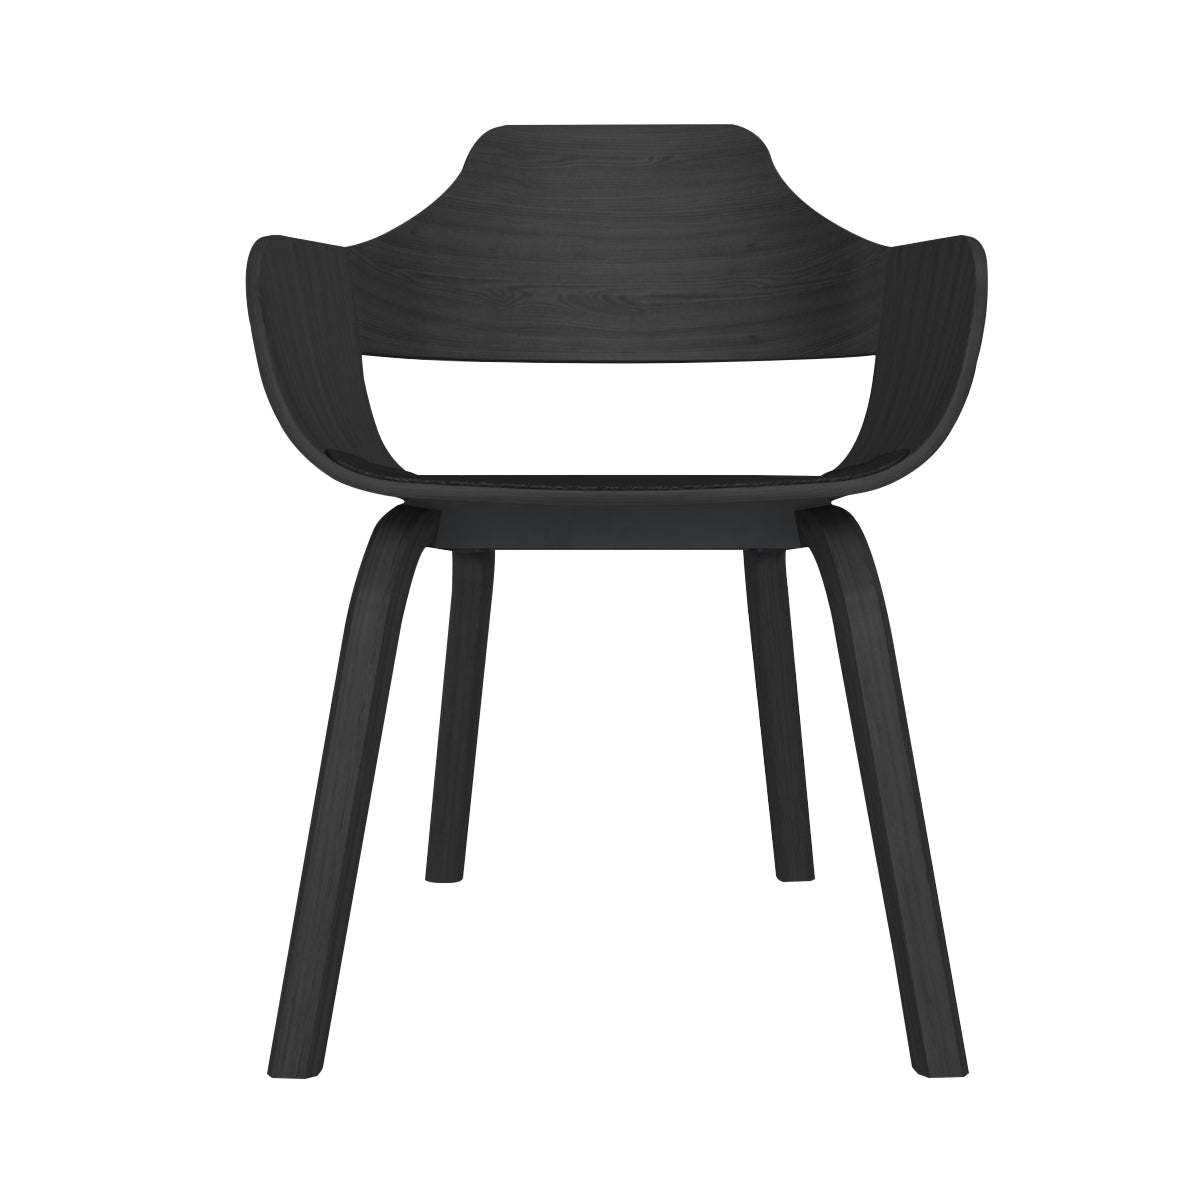 Showtime Chair: Seat Upholstered + Ash Stained Black